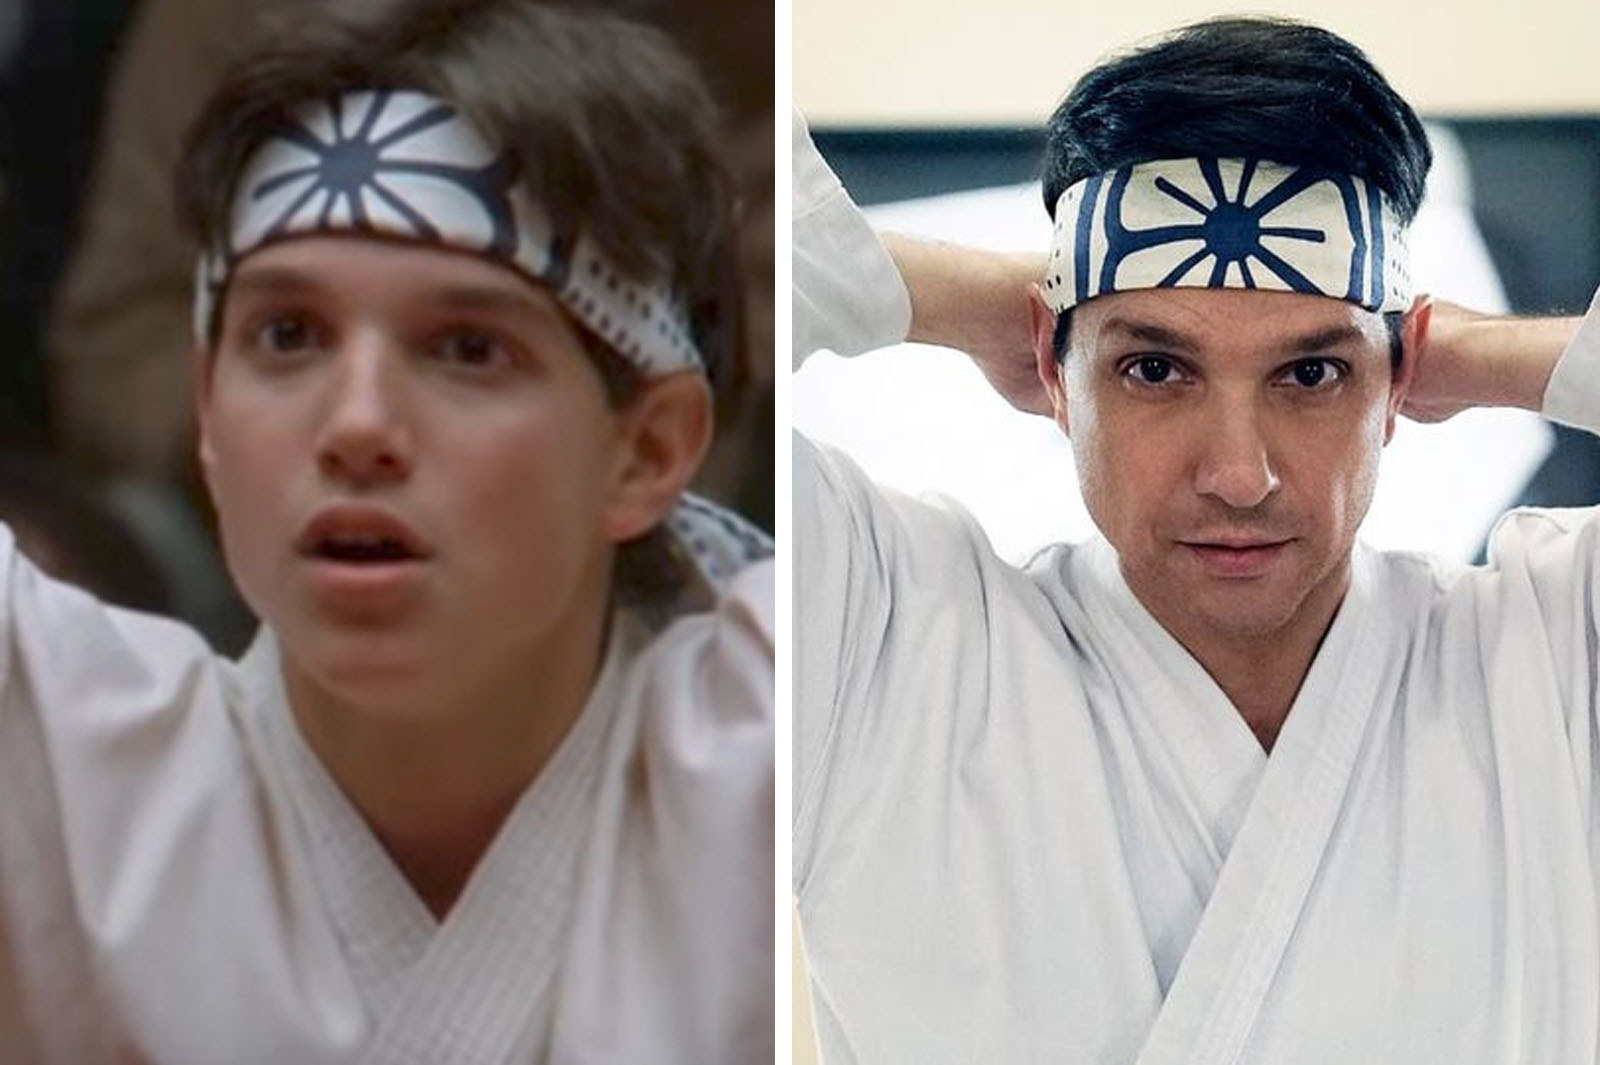 How Old Are the 'Kids' of 'Cobra Kai?